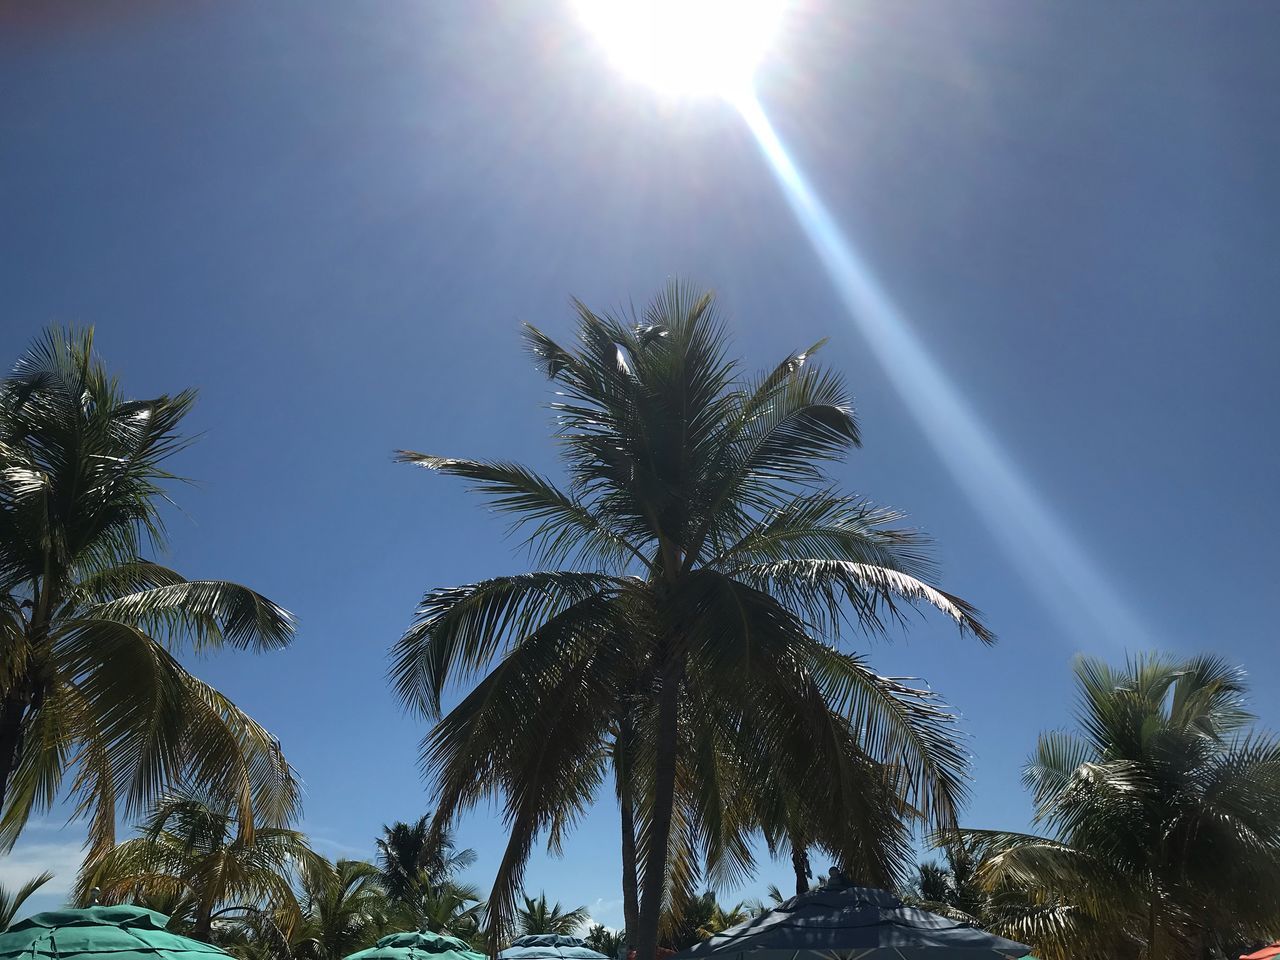 sky, tropical climate, tree, palm tree, low angle view, sunlight, plant, sunbeam, lens flare, sun, beauty in nature, nature, growth, sunny, no people, day, clear sky, tranquility, scenics - nature, outdoors, bright, palm leaf, coconut palm tree, tropical tree, solar flare, streaming